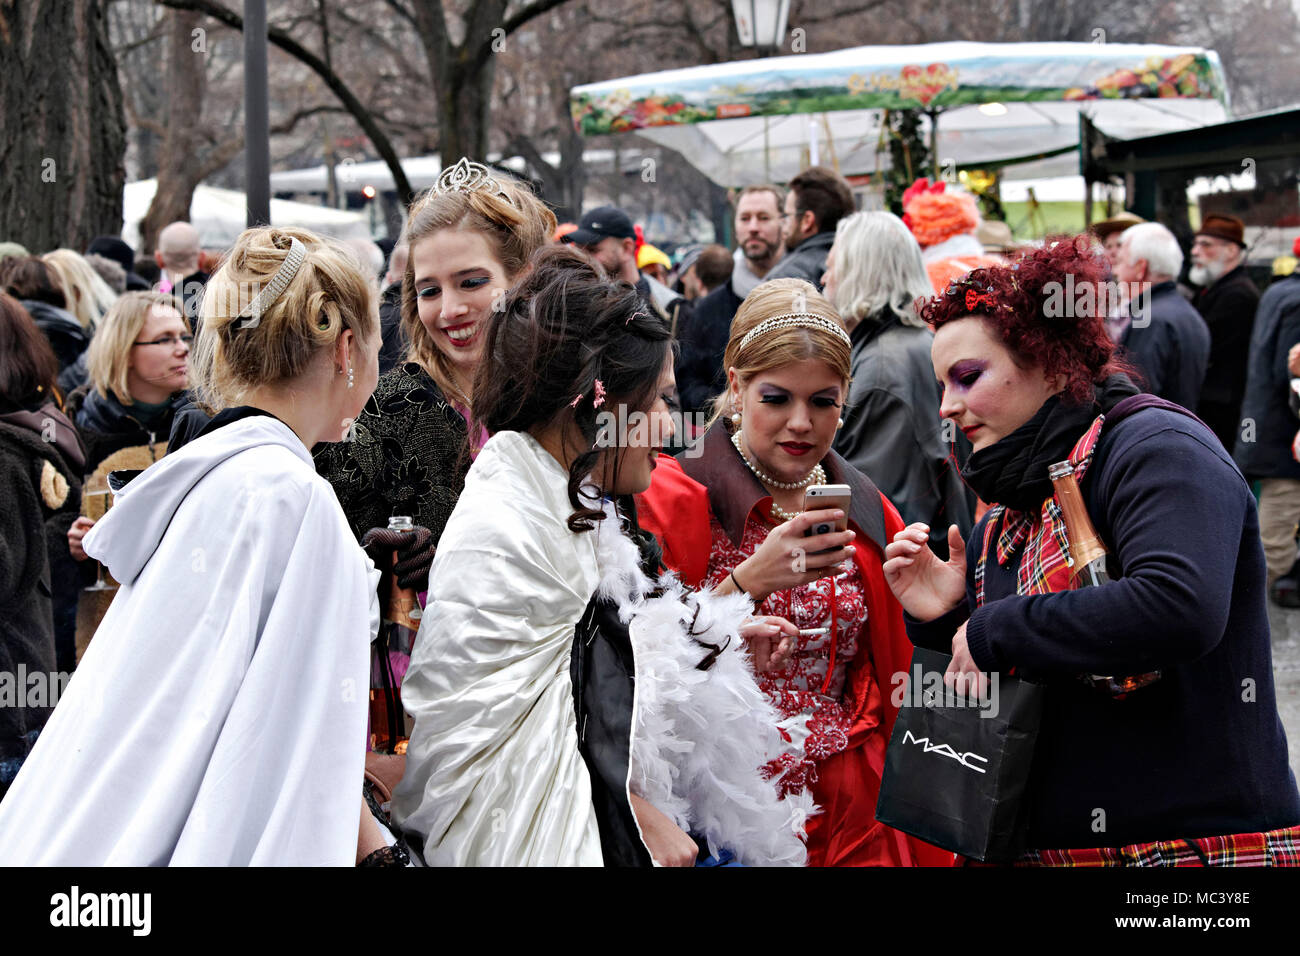 3 woman looking at mobile phone display, Fasching street party, Munich, Upper Bavaria, Germany, Europe Stock Photo